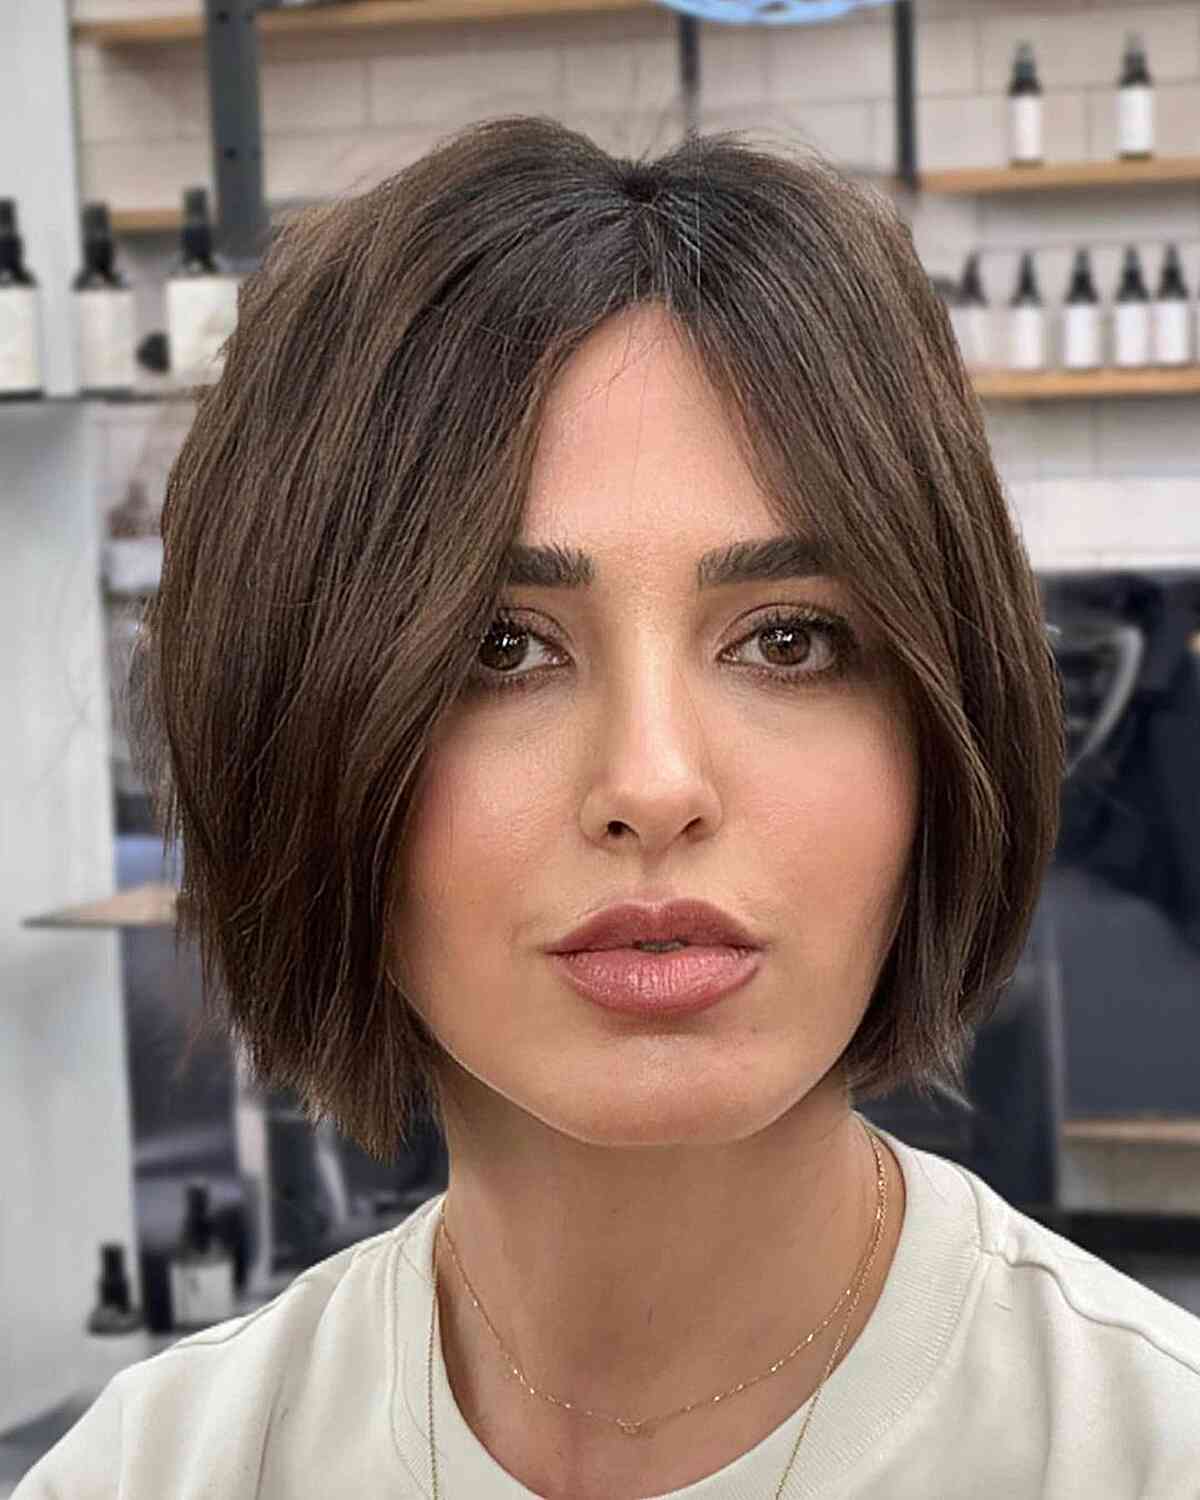 Chin-Length Ghost Cut Bob for women with face-framing hair